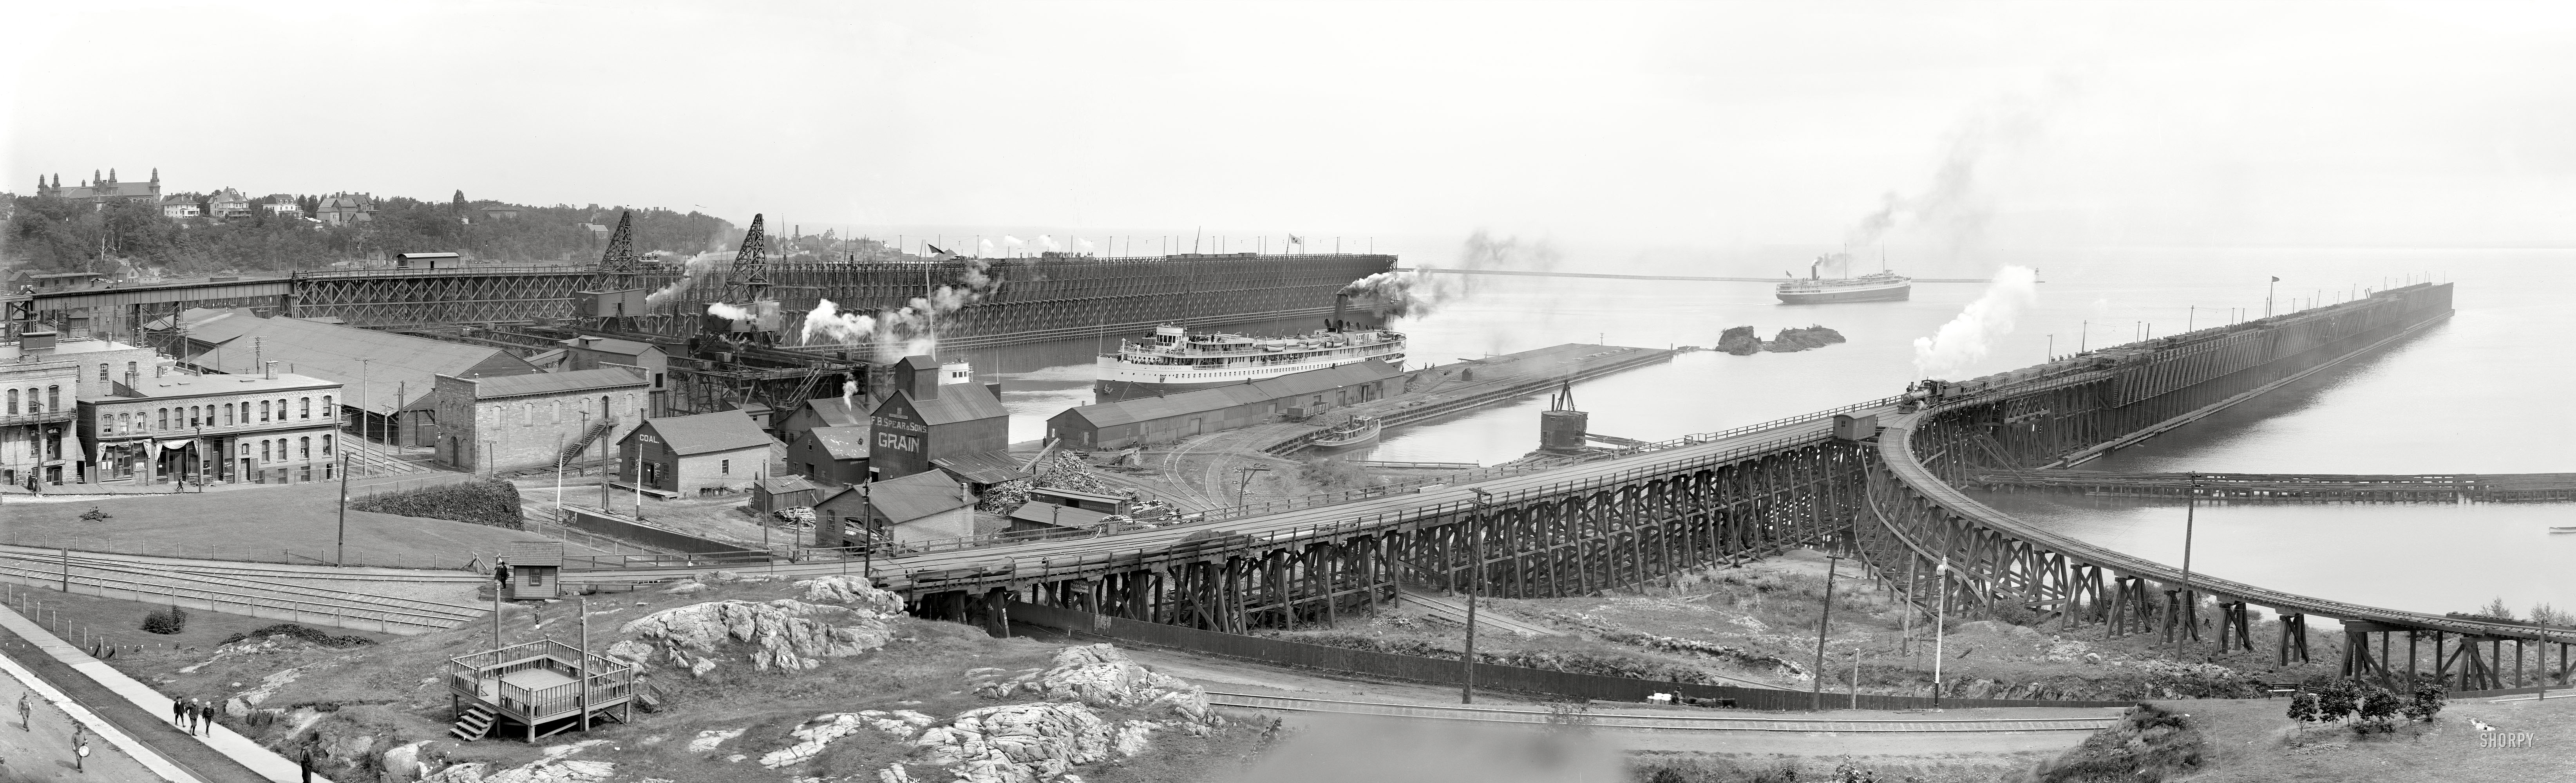 Lake Superior circa 1908. "The harbor and ore docks, Marquette, Michigan." Note the tiny parade at left. Panorama of three 8x10 glass plates. View full size.